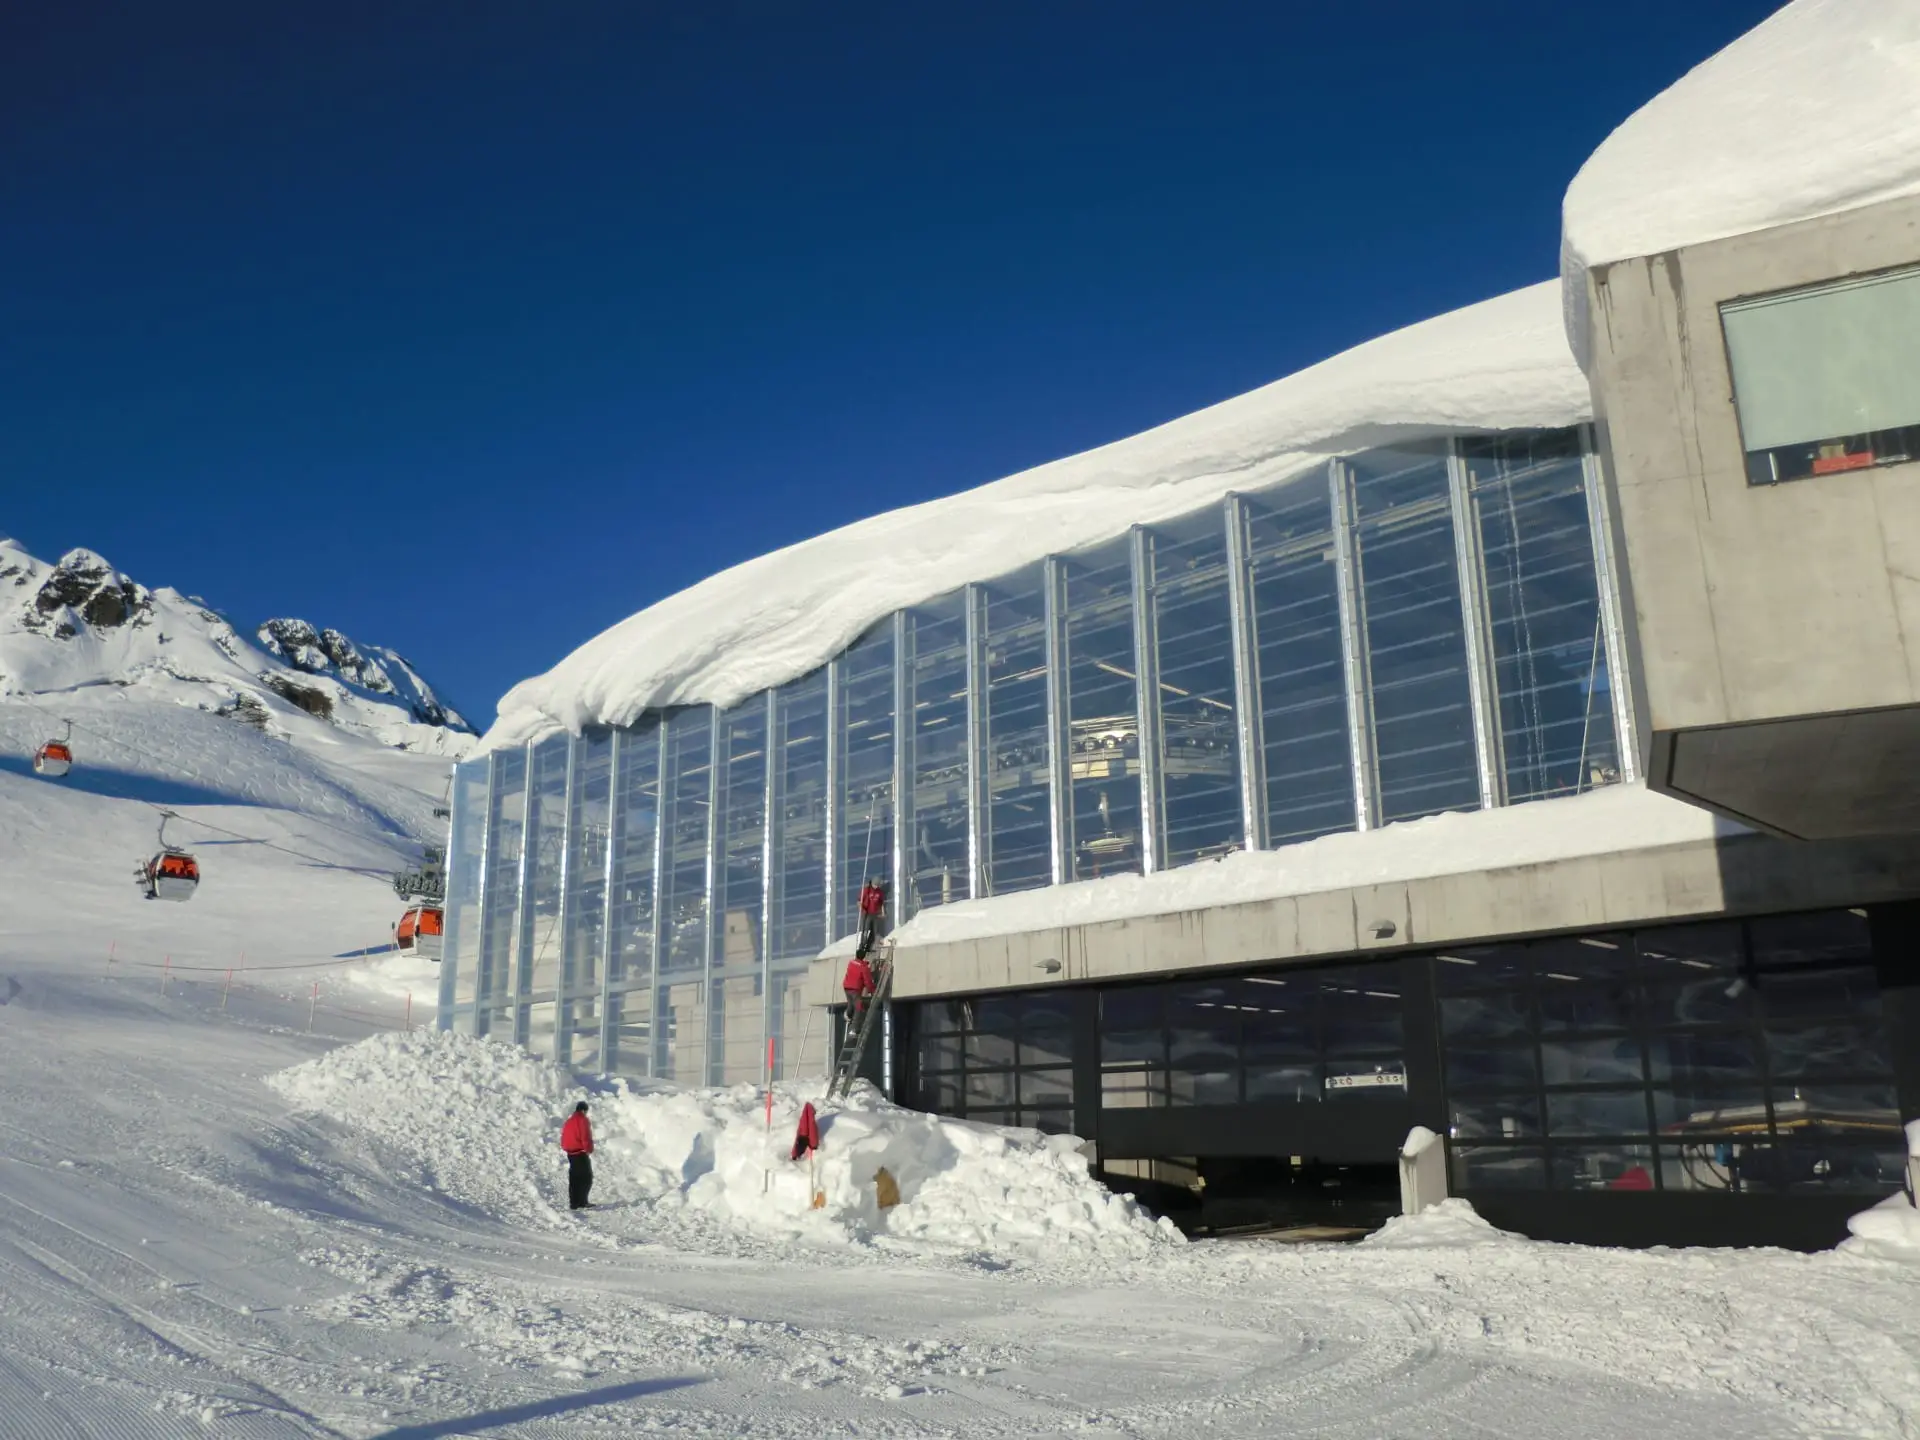 The Grasjoch Bahn is comprised of 2,435 m² of clear  and duable Texlon® ETFE foil